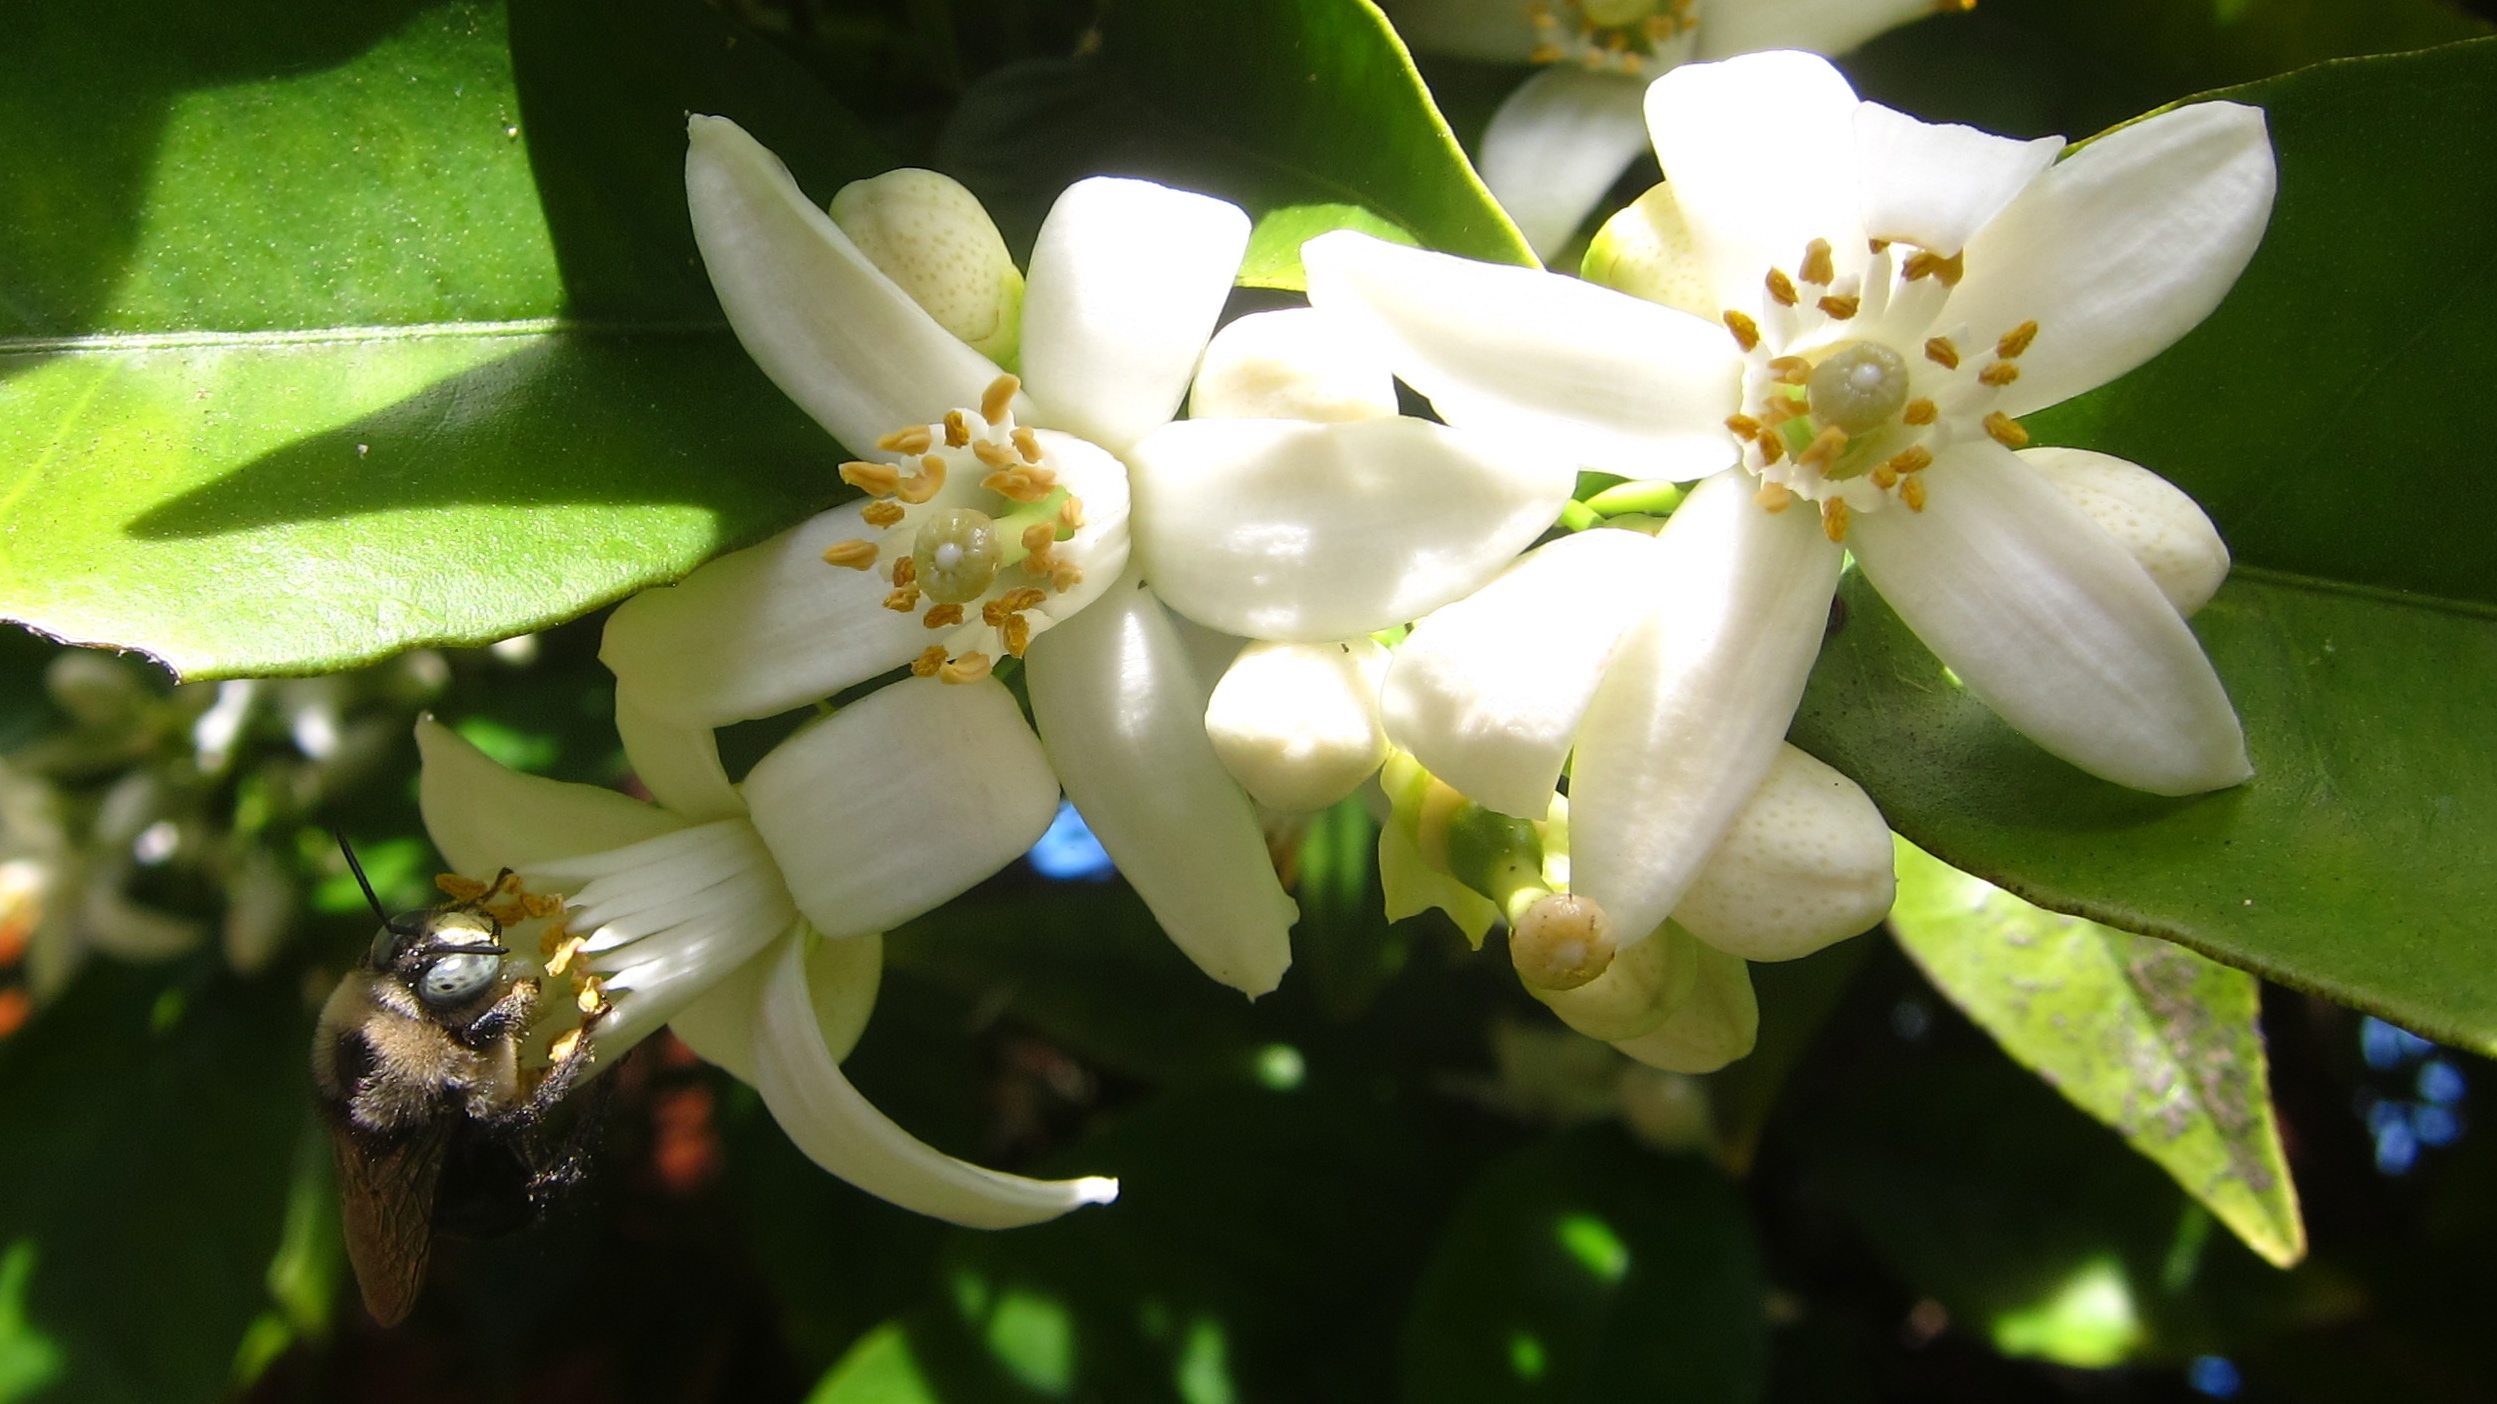 the blossoms on the lemon tree bloom are very white